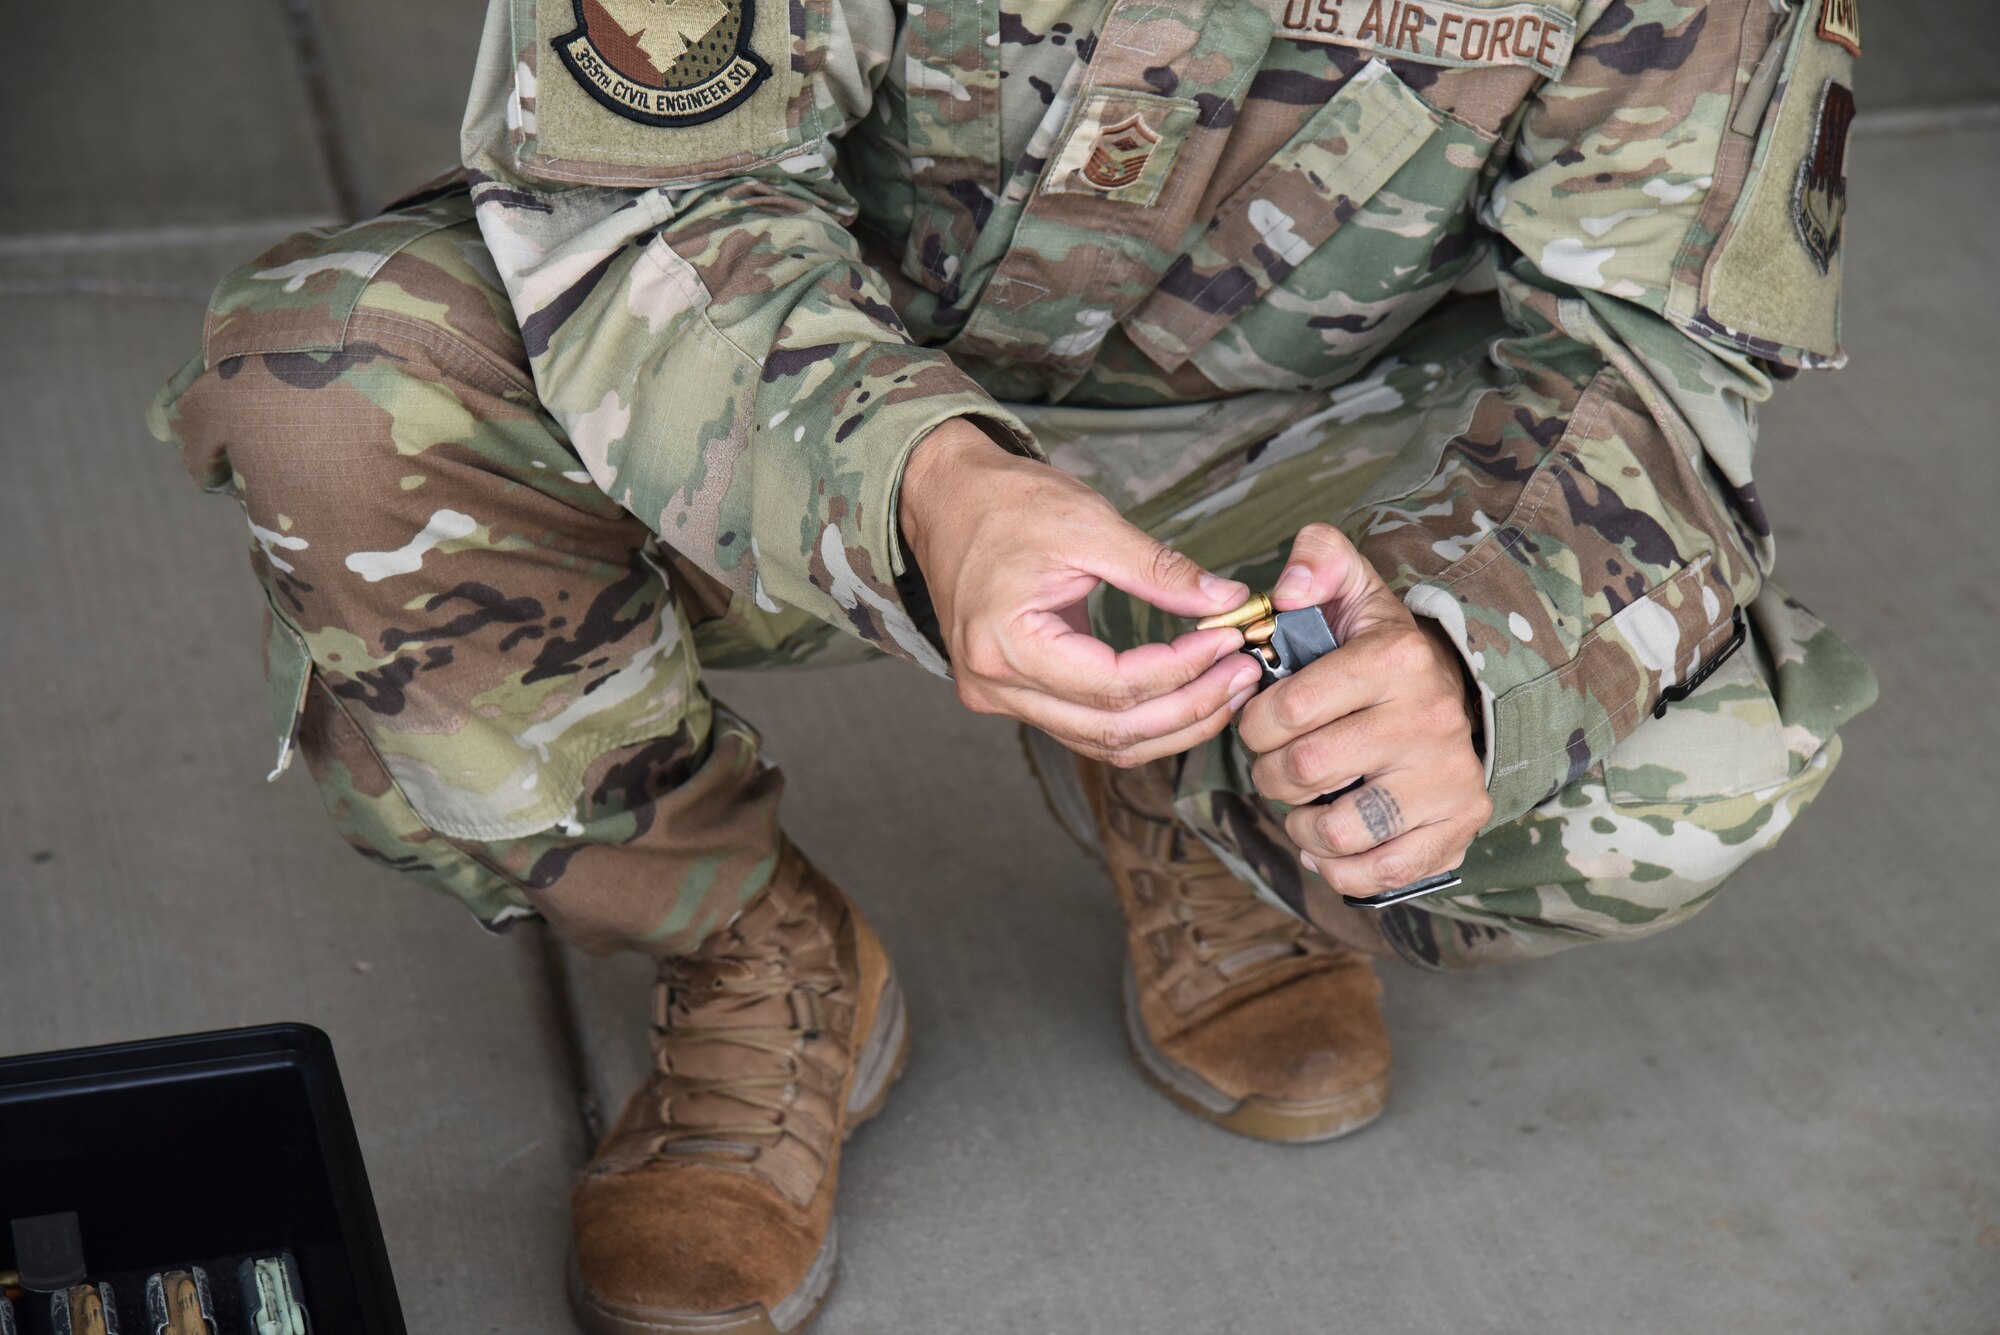 Pictured above is an Airman loading ammunition into a magazine.